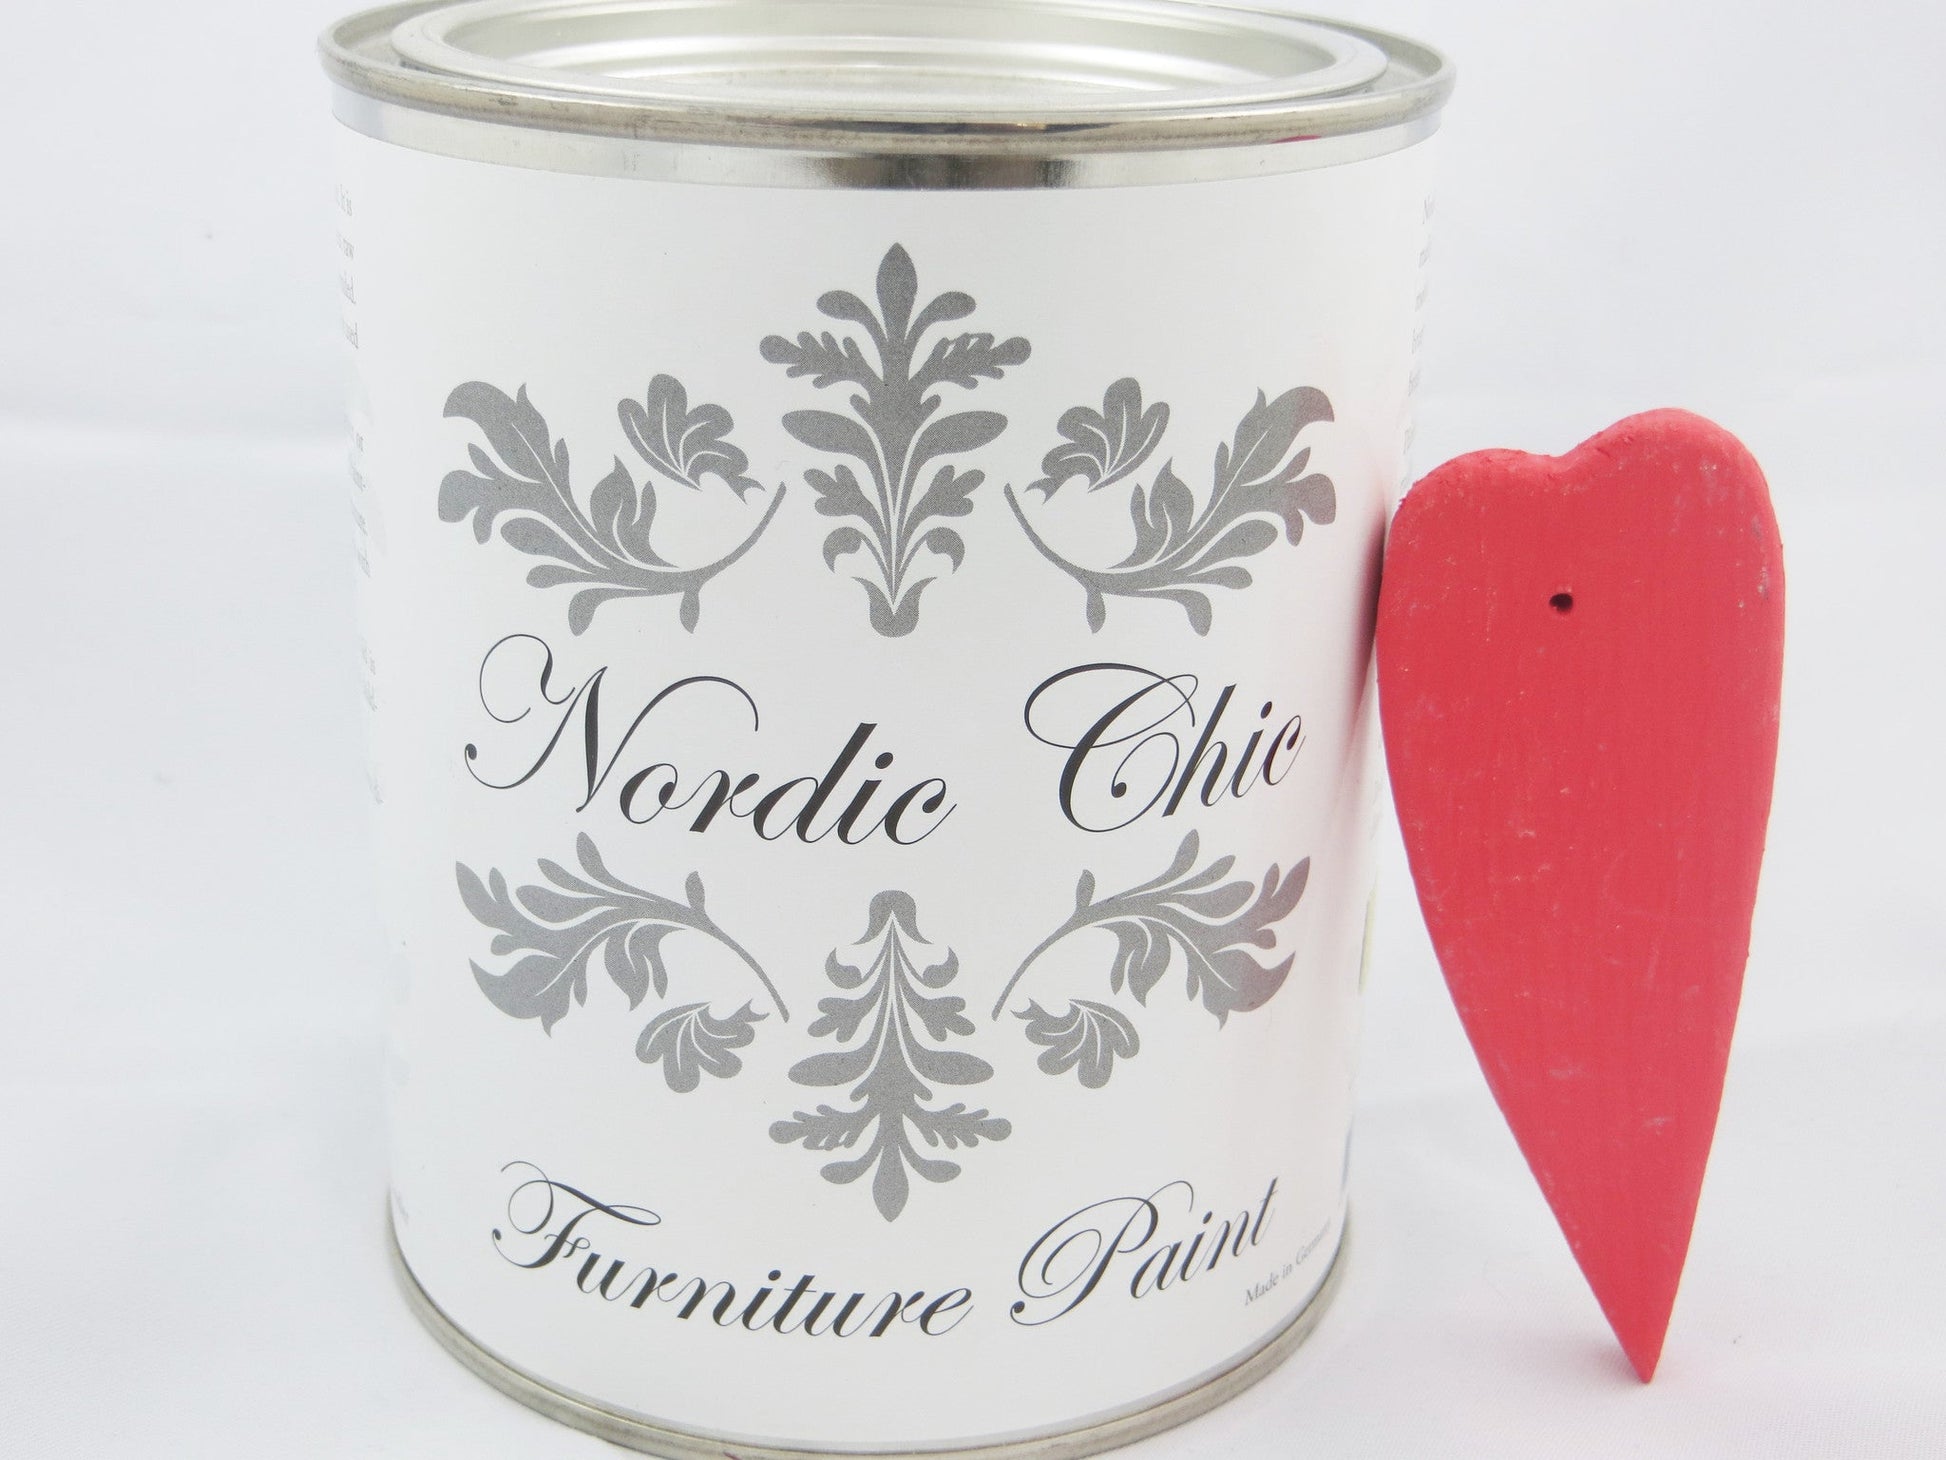 Nordic Chic Furniture Paint - Christmas Red - Nordic Chic®